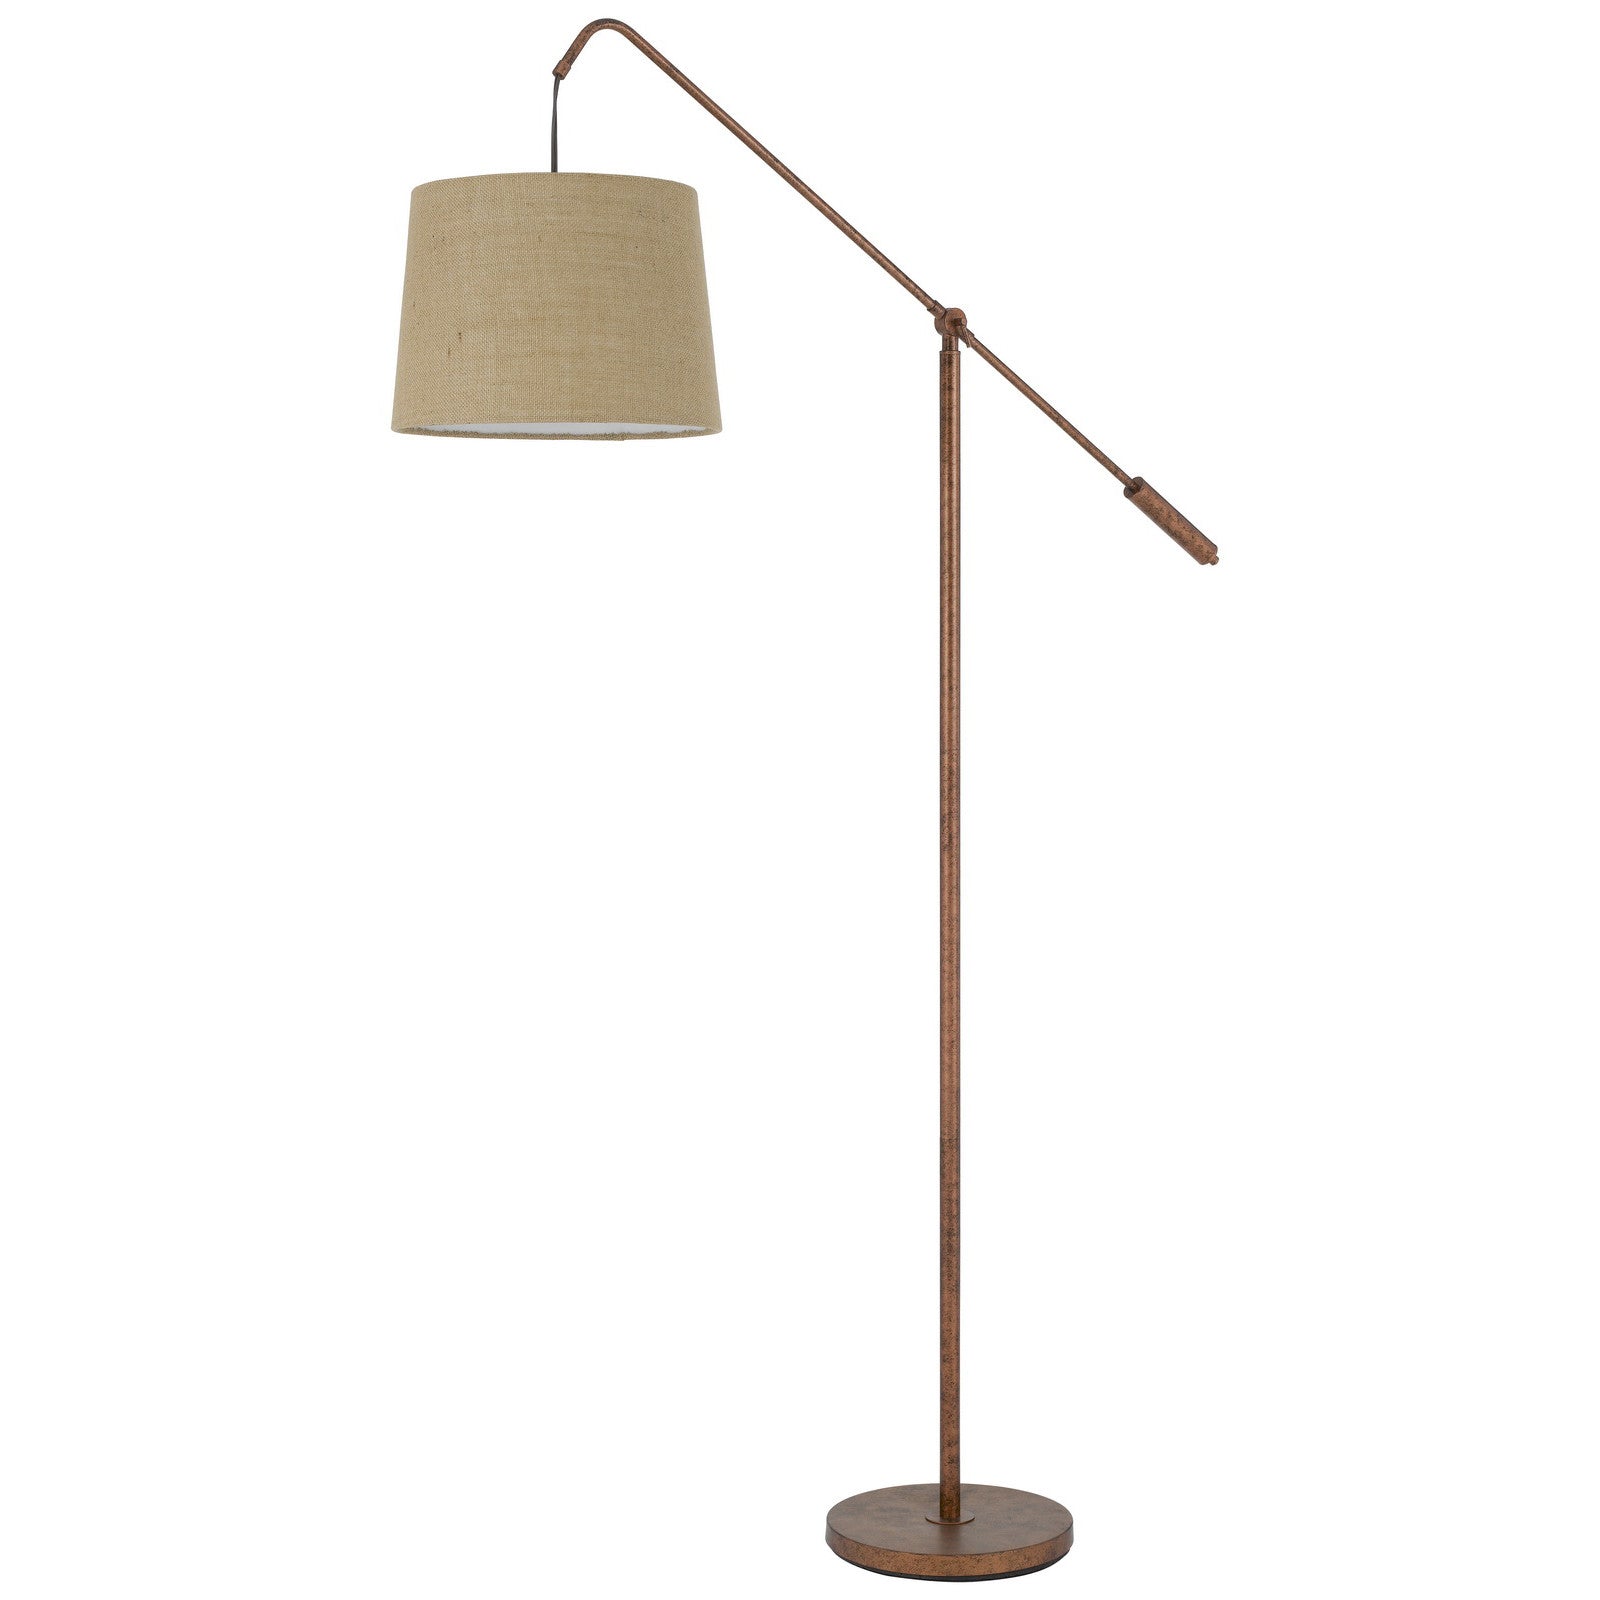 68" Rusted Adjustable Traditional Shaped Floor Lamp With Rust Drum Shade